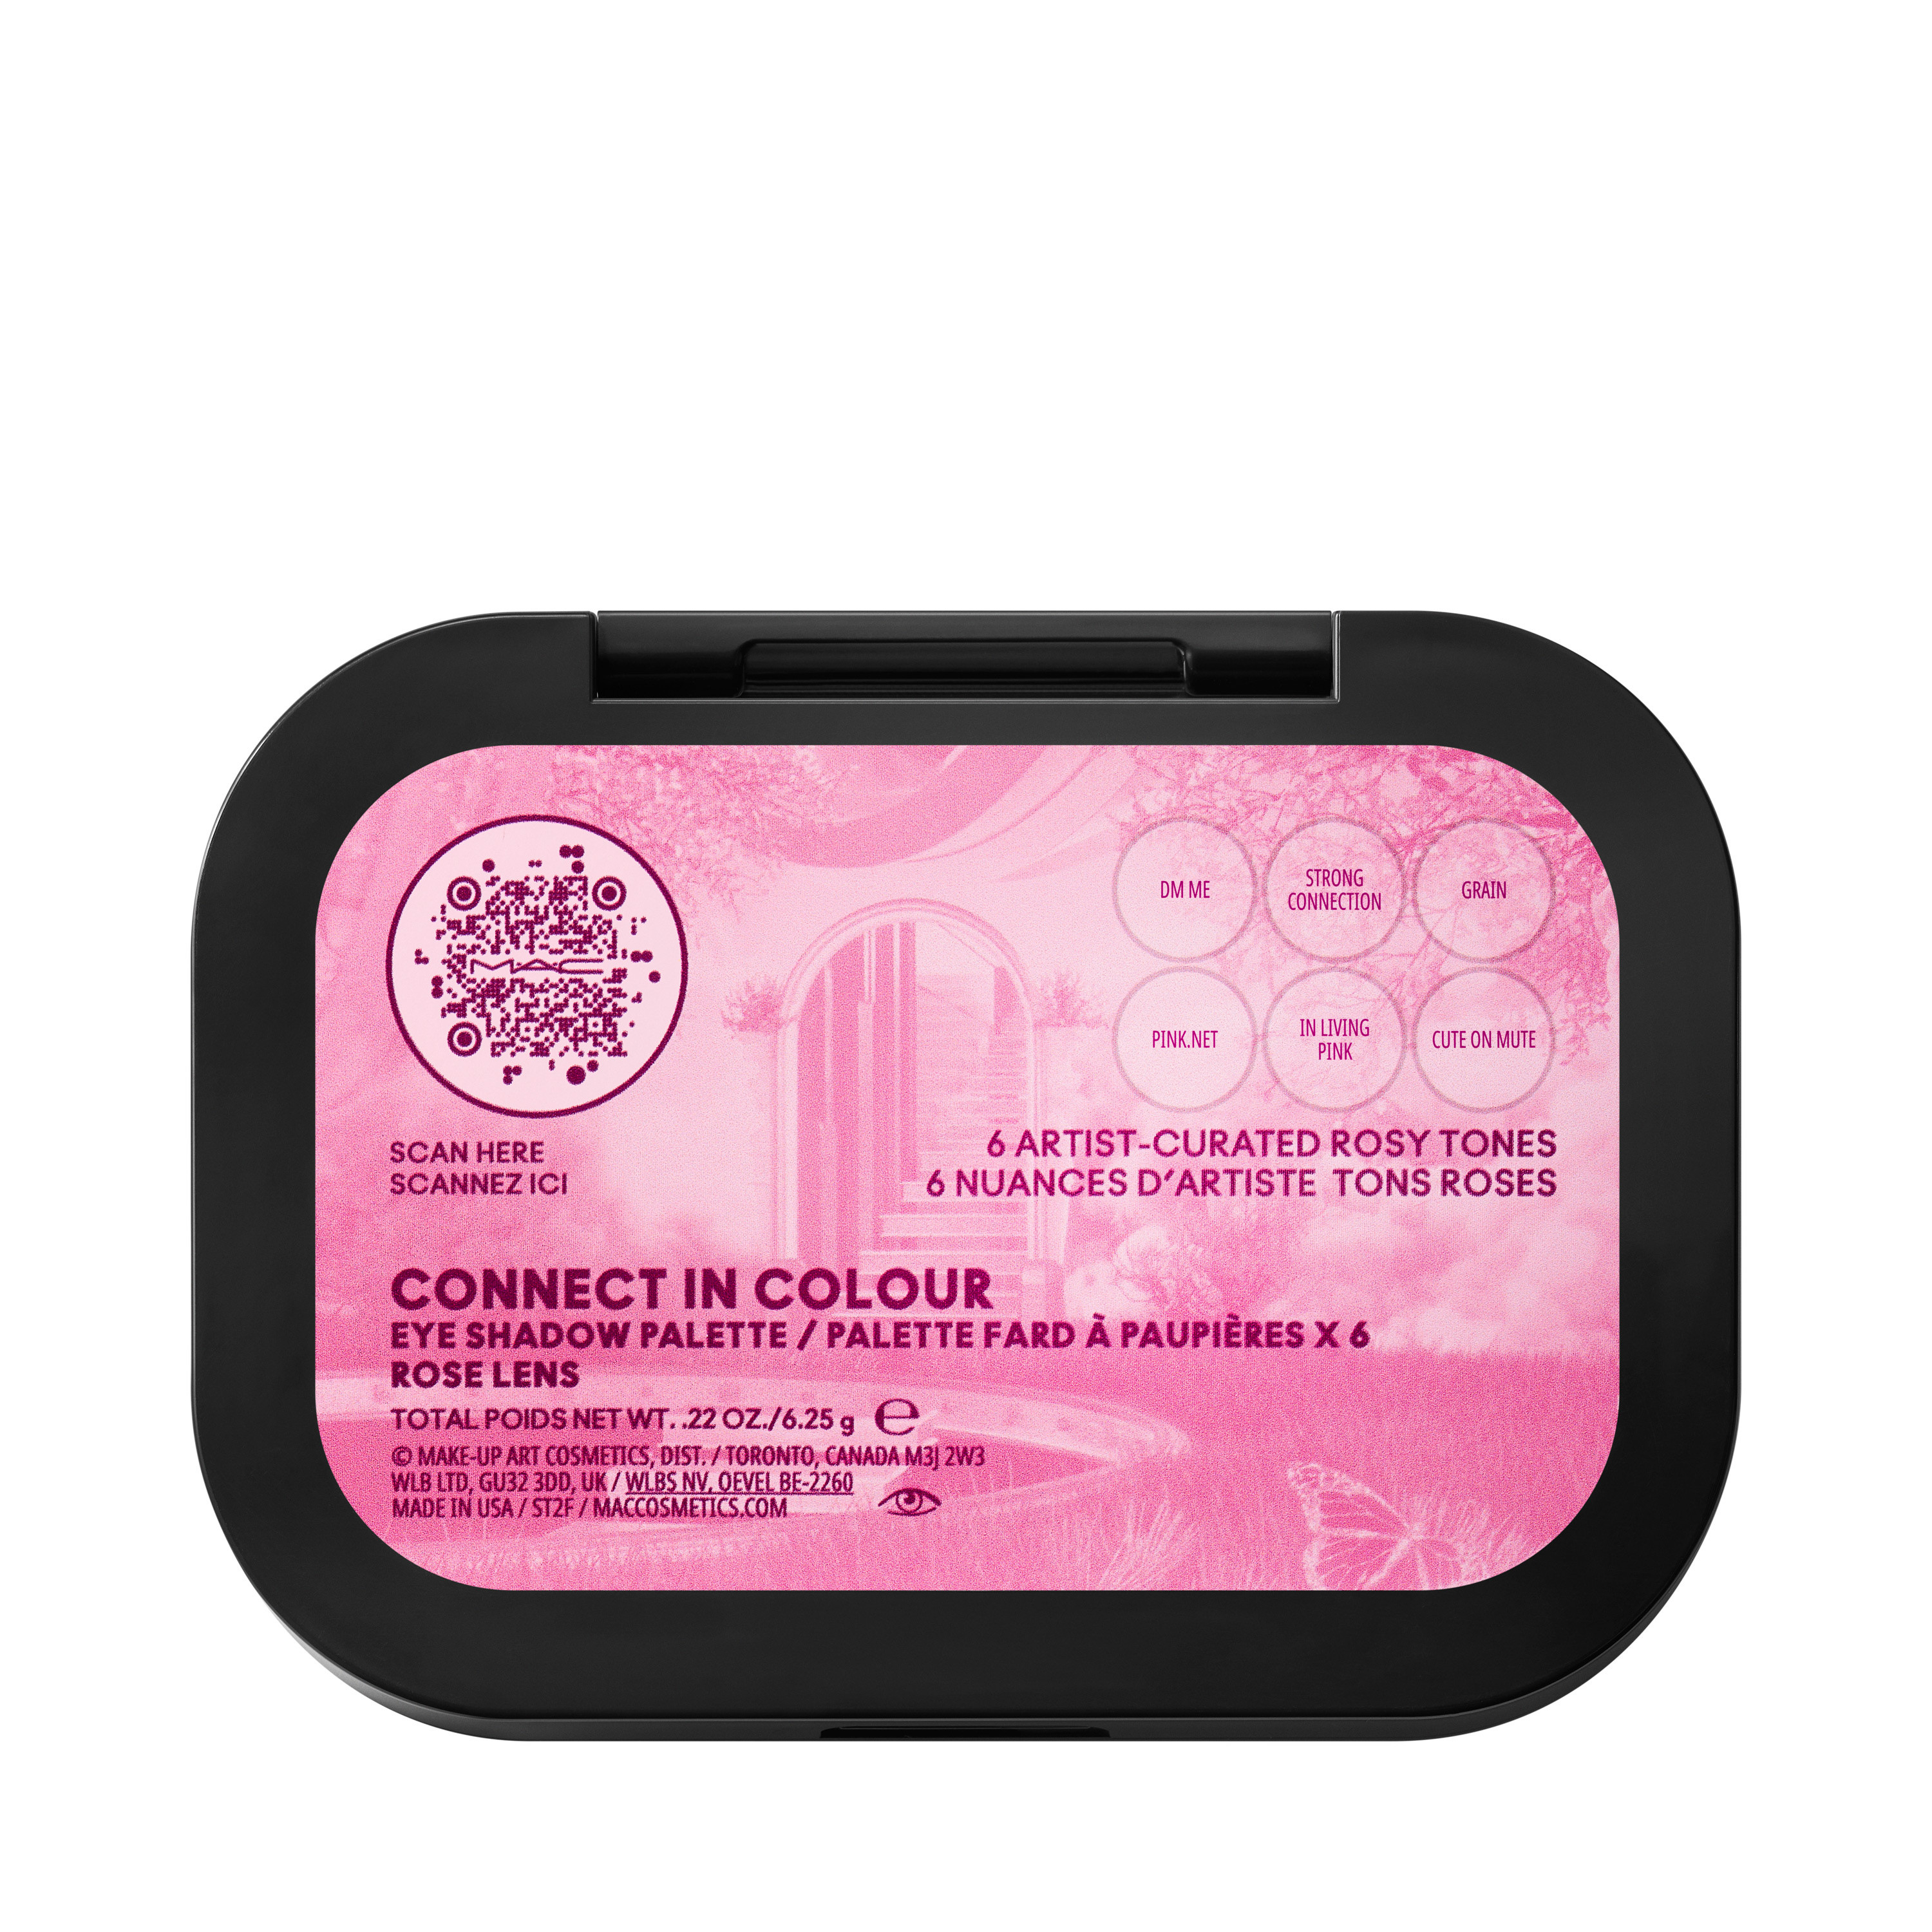 Connect in colour eye palette x6 - Rose Lens, Pink, large image number 2